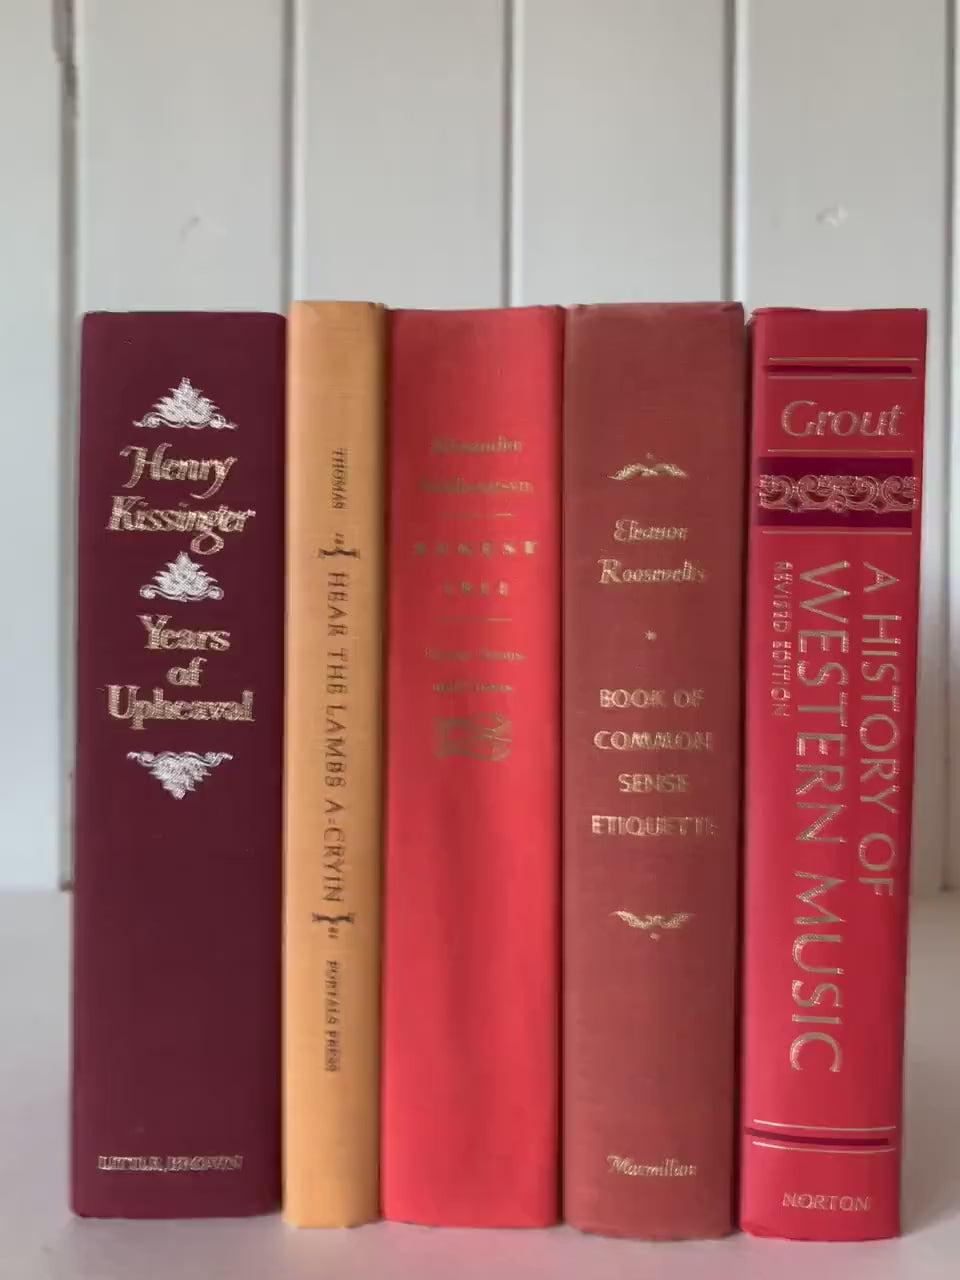 Vintage Oversized Orange Red Books for Decor, Books By Color